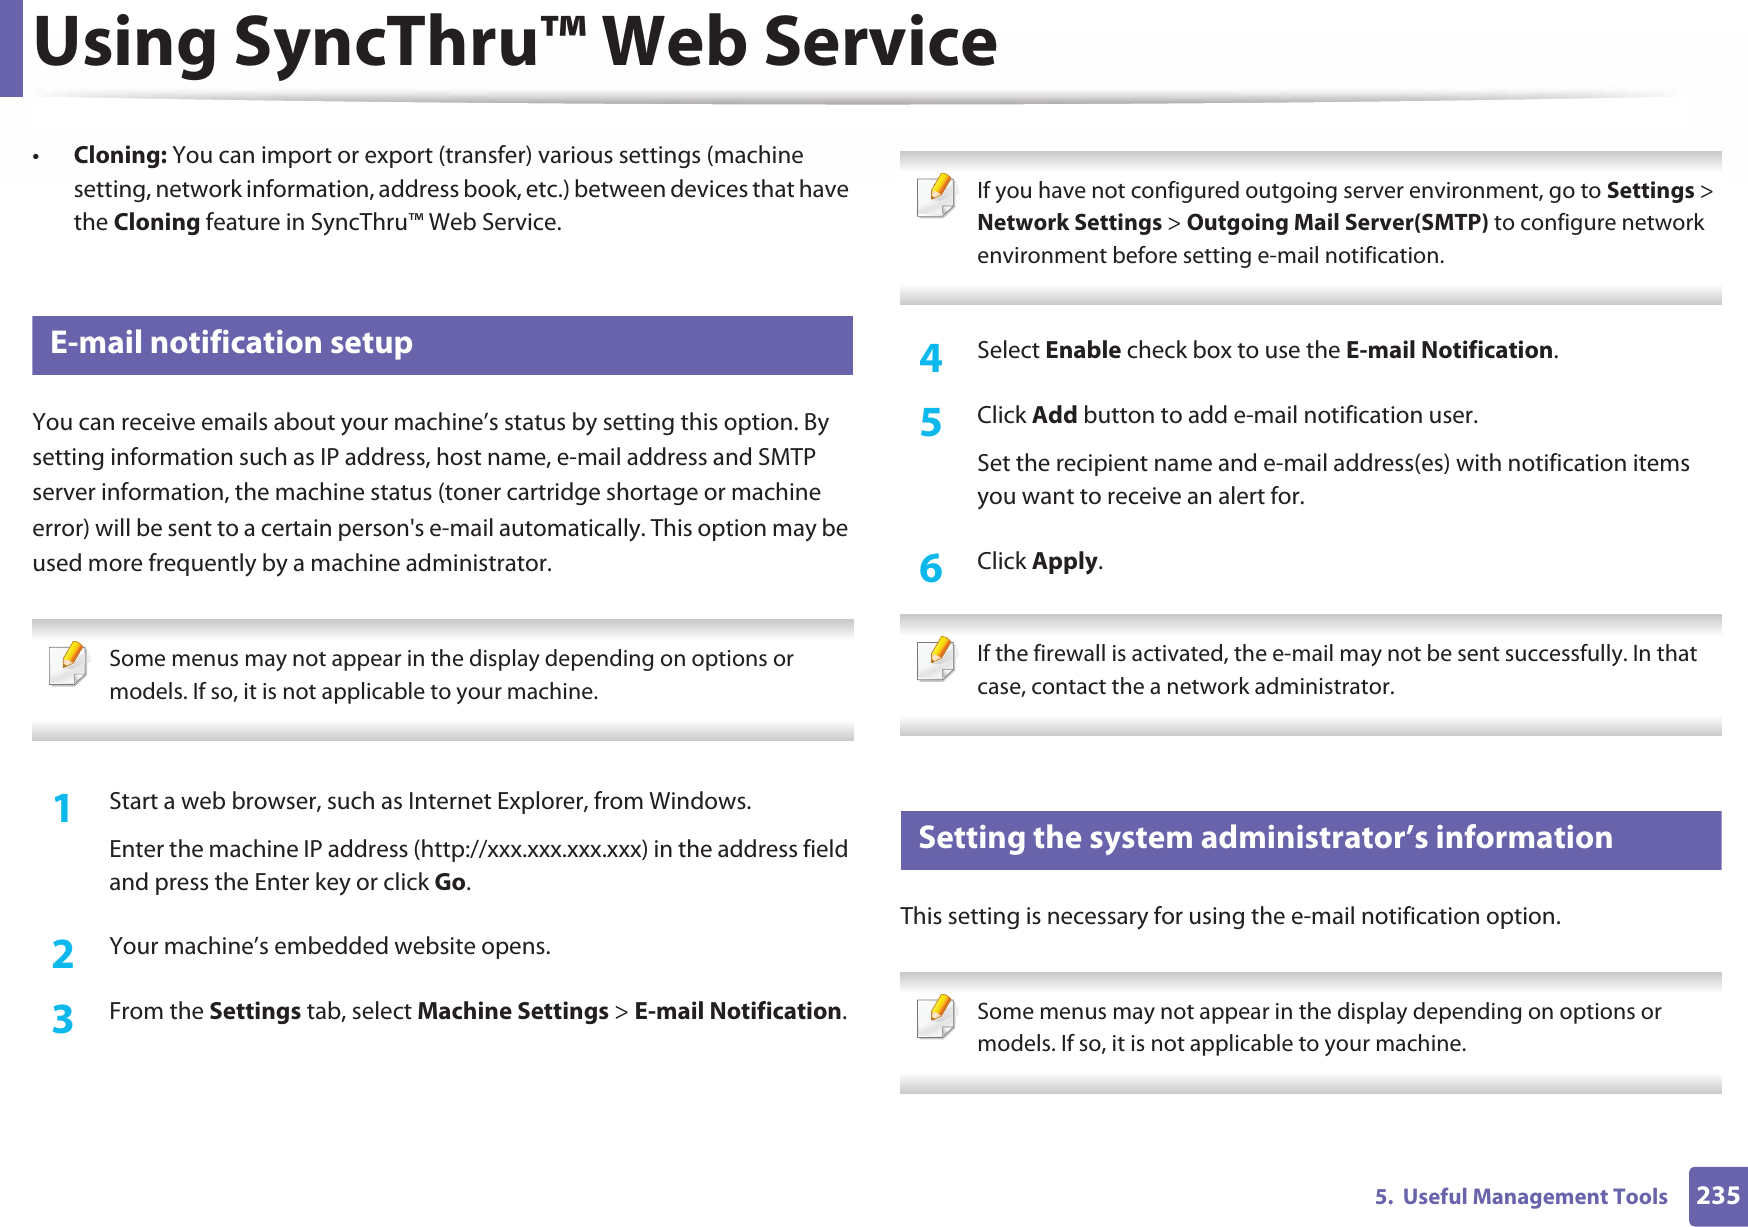 Using SyncThru™ Web Service2355.  Useful Management Tools•Cloning: You can import or export (transfer) various settings (machine setting, network information, address book, etc.) between devices that have the Cloning feature in SyncThru™ Web Service.3 E-mail notification setupYou can receive emails about your machine’s status by setting this option. By setting information such as IP address, host name, e-mail address and SMTP server information, the machine status (toner cartridge shortage or machine error) will be sent to a certain person&apos;s e-mail automatically. This option may be used more frequently by a machine administrator.  Some menus may not appear in the display depending on options or models. If so, it is not applicable to your machine. 1Start a web browser, such as Internet Explorer, from Windows.Enter the machine IP address (http://xxx.xxx.xxx.xxx) in the address field and press the Enter key or click Go.2  Your machine’s embedded website opens.3  From the Settings tab, select Machine Settings &gt; E-mail Notification.  If you have not configured outgoing server environment, go to Settings &gt; Network Settings &gt; Outgoing Mail Server(SMTP) to configure network environment before setting e-mail notification.  4  Select Enable check box to use the E-mail Notification.5  Click Add button to add e-mail notification user. Set the recipient name and e-mail address(es) with notification items you want to receive an alert for.6  Click Apply. If the firewall is activated, the e-mail may not be sent successfully. In that case, contact the a network administrator. 4 Setting the system administrator’s informationThis setting is necessary for using the e-mail notification option. Some menus may not appear in the display depending on options or models. If so, it is not applicable to your machine. 